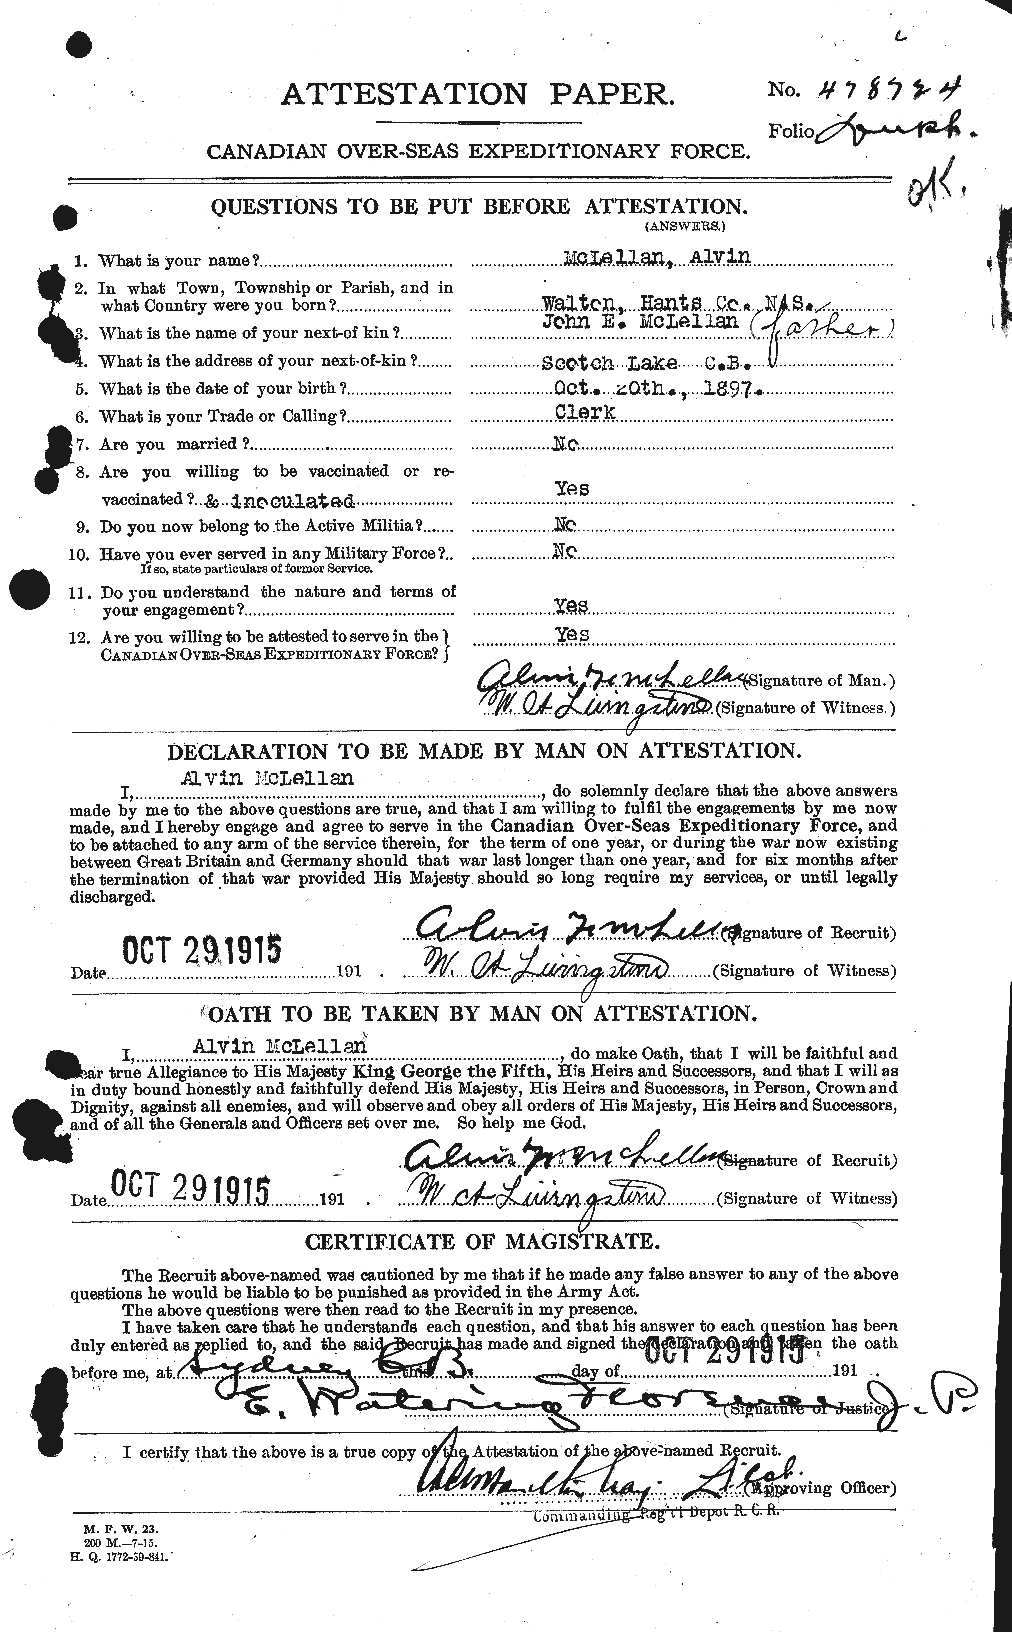 Personnel Records of the First World War - CEF 535385a